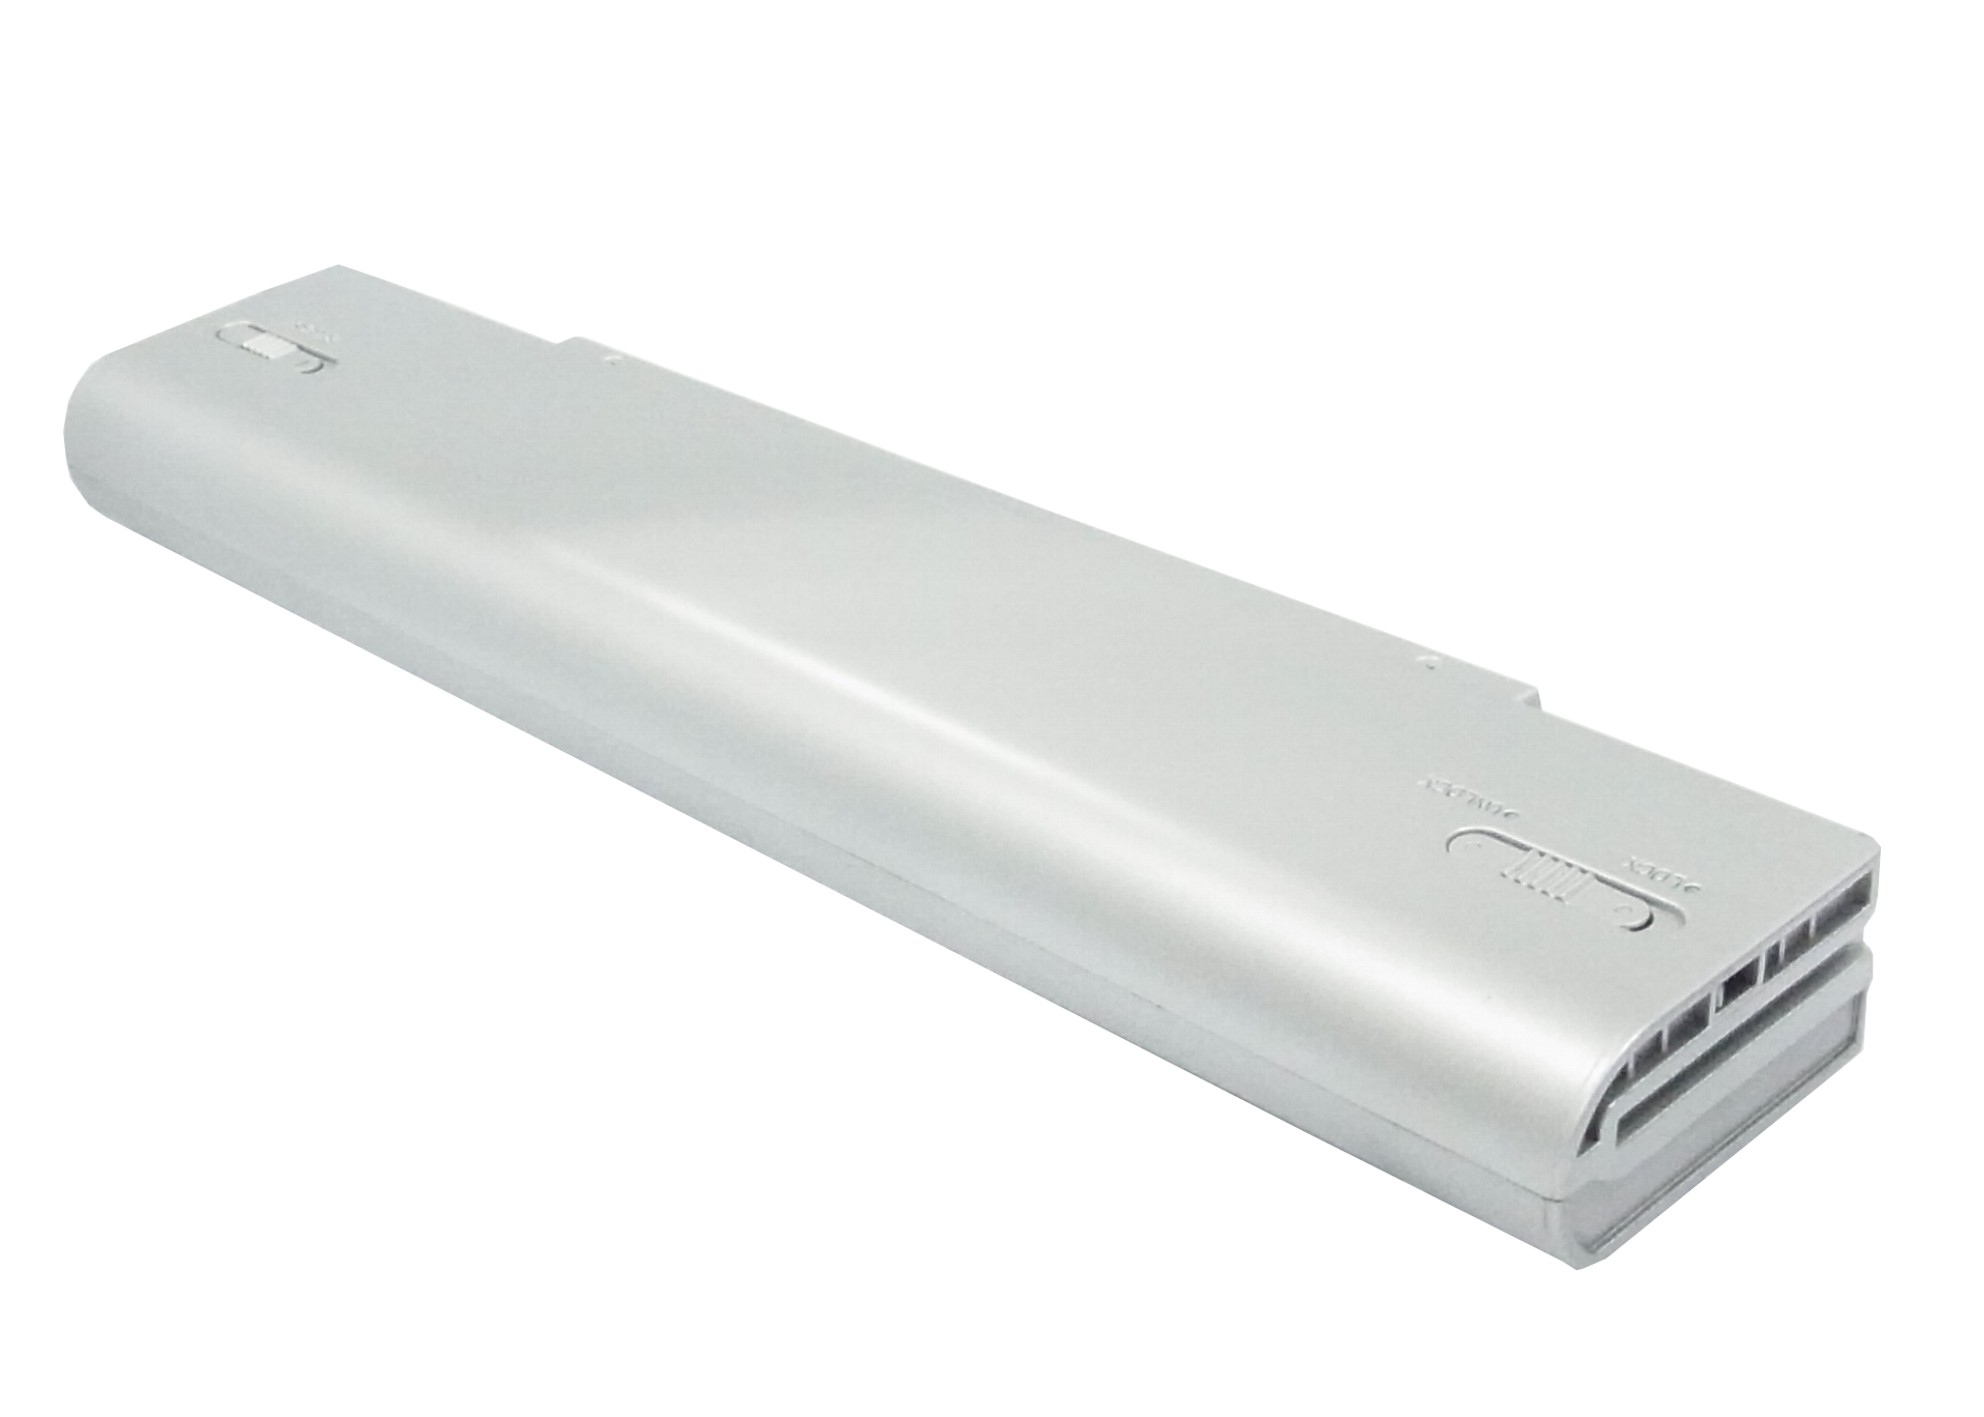 Cameron Sino Battery for Sony VAIO VGN-C90S VGN-C25G VGP-BPS2A/S VGP-BPS2C/S VGP-BPS2C/S/E